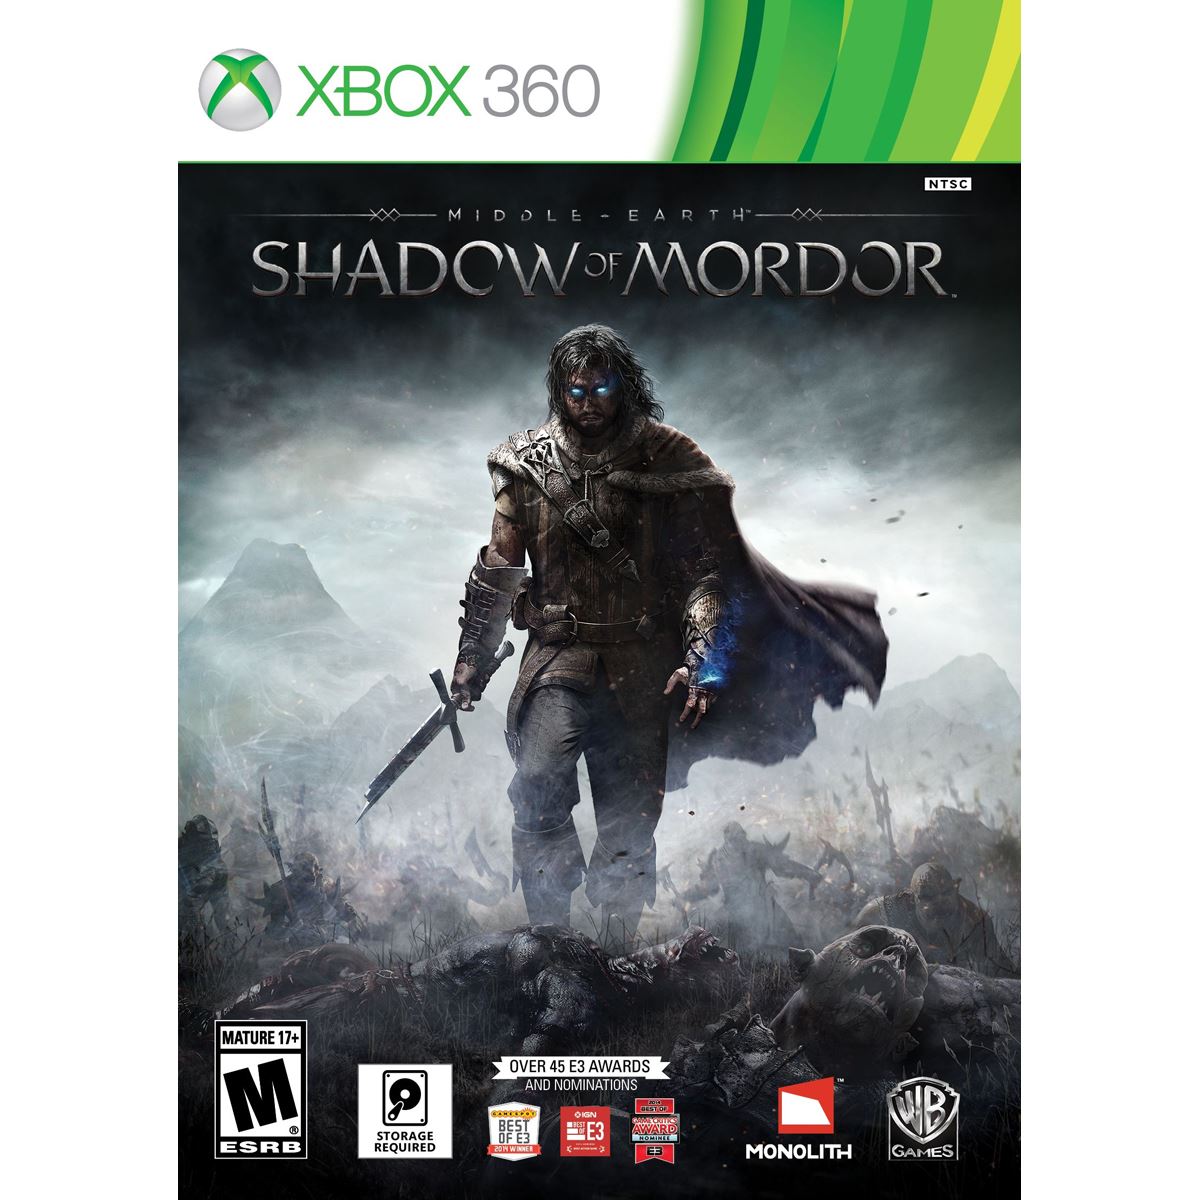 Xbox 360 Middle Earth: Shadow of Mordor